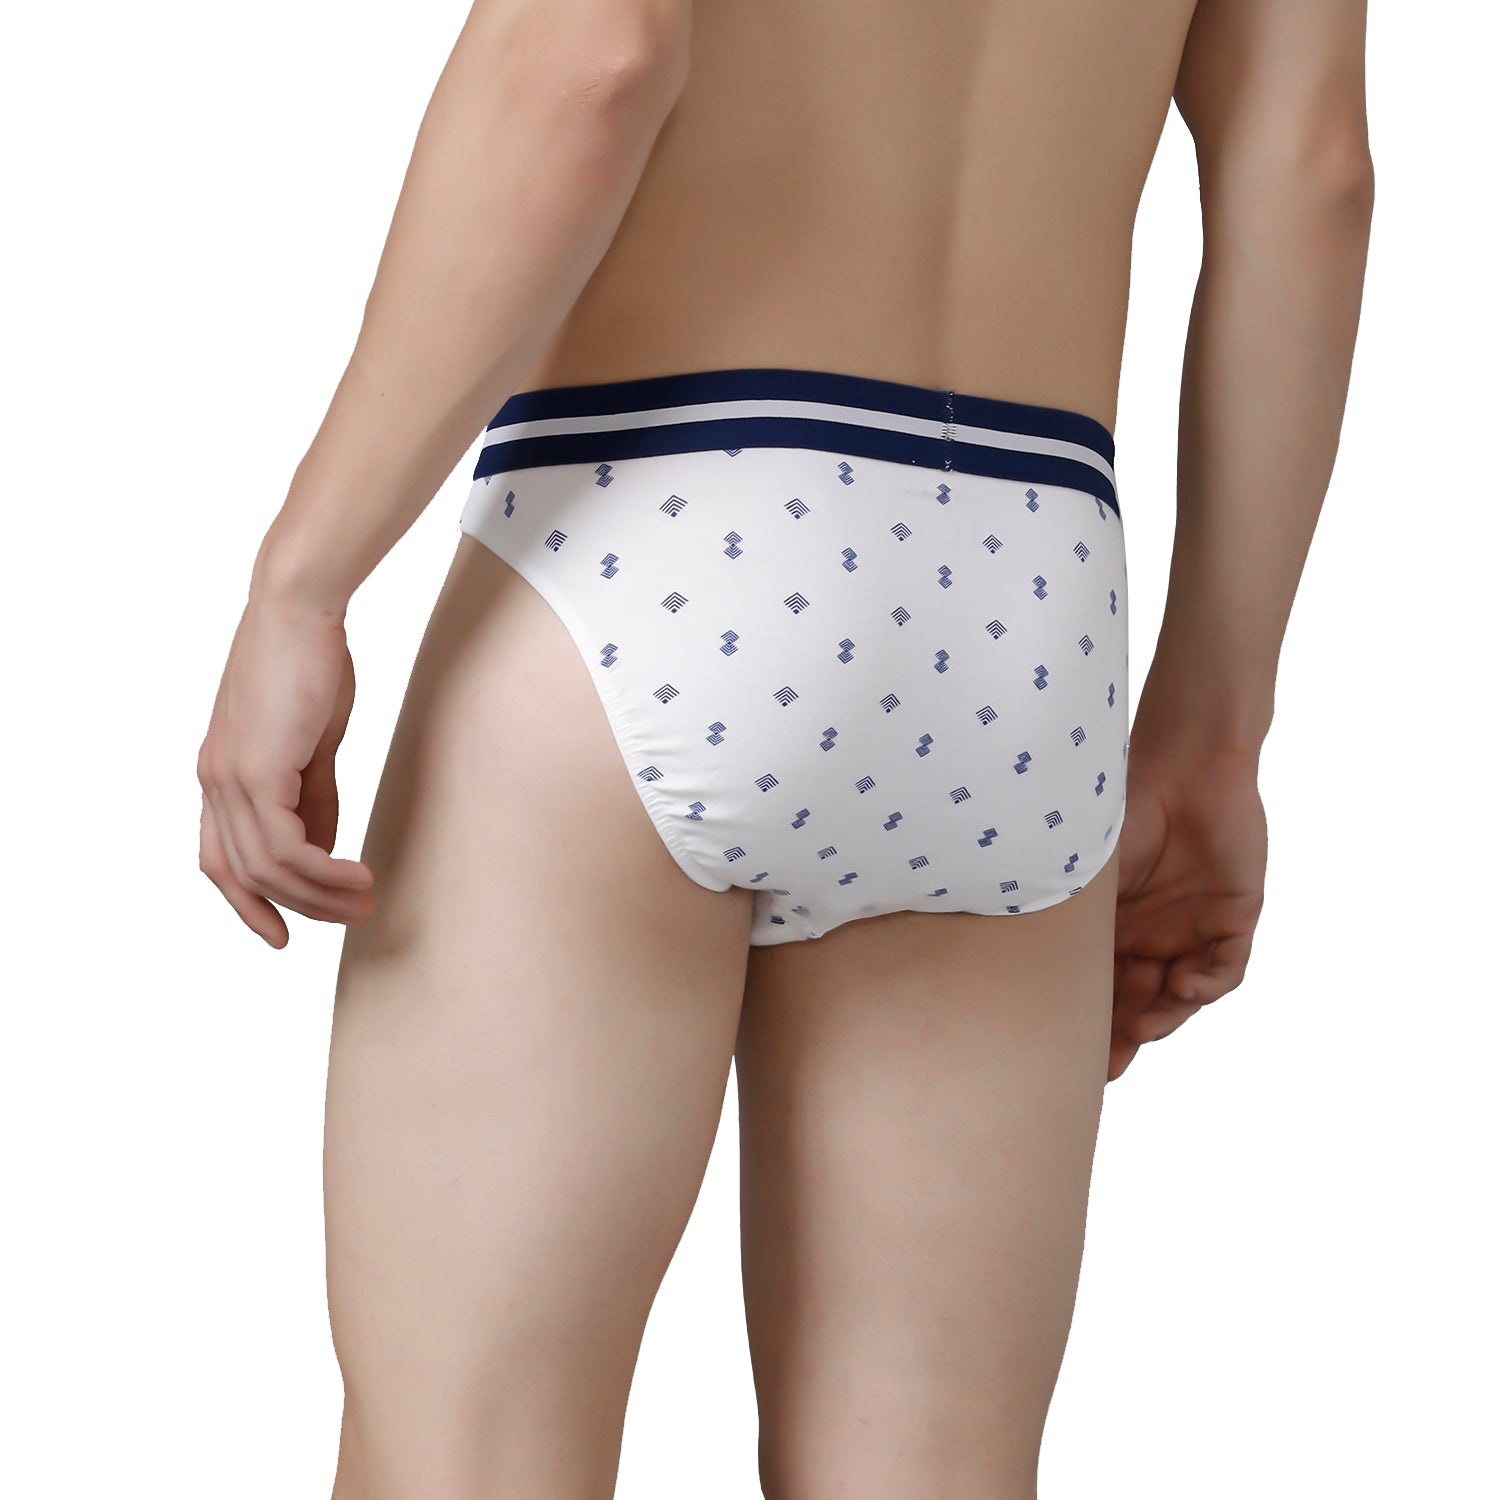 CP BRO Men's Printed Briefs with Exposed Waistband Value Pack - White (Pack of 2)